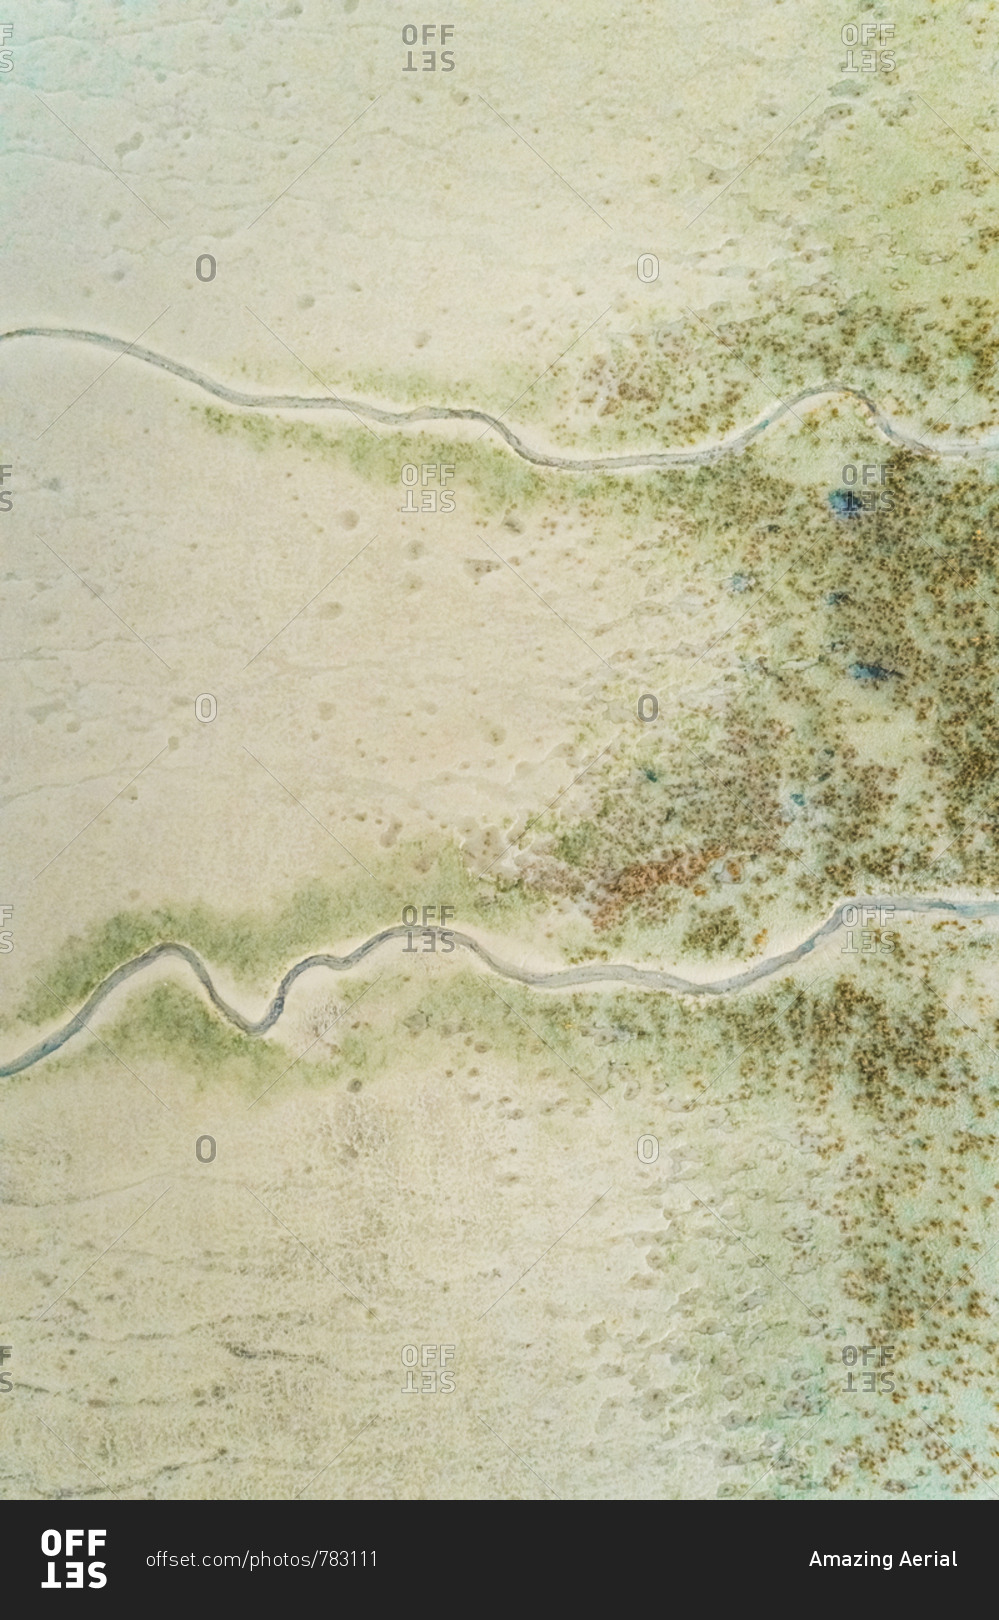 Aerial view of design pattern created by wetland, Netherlands.